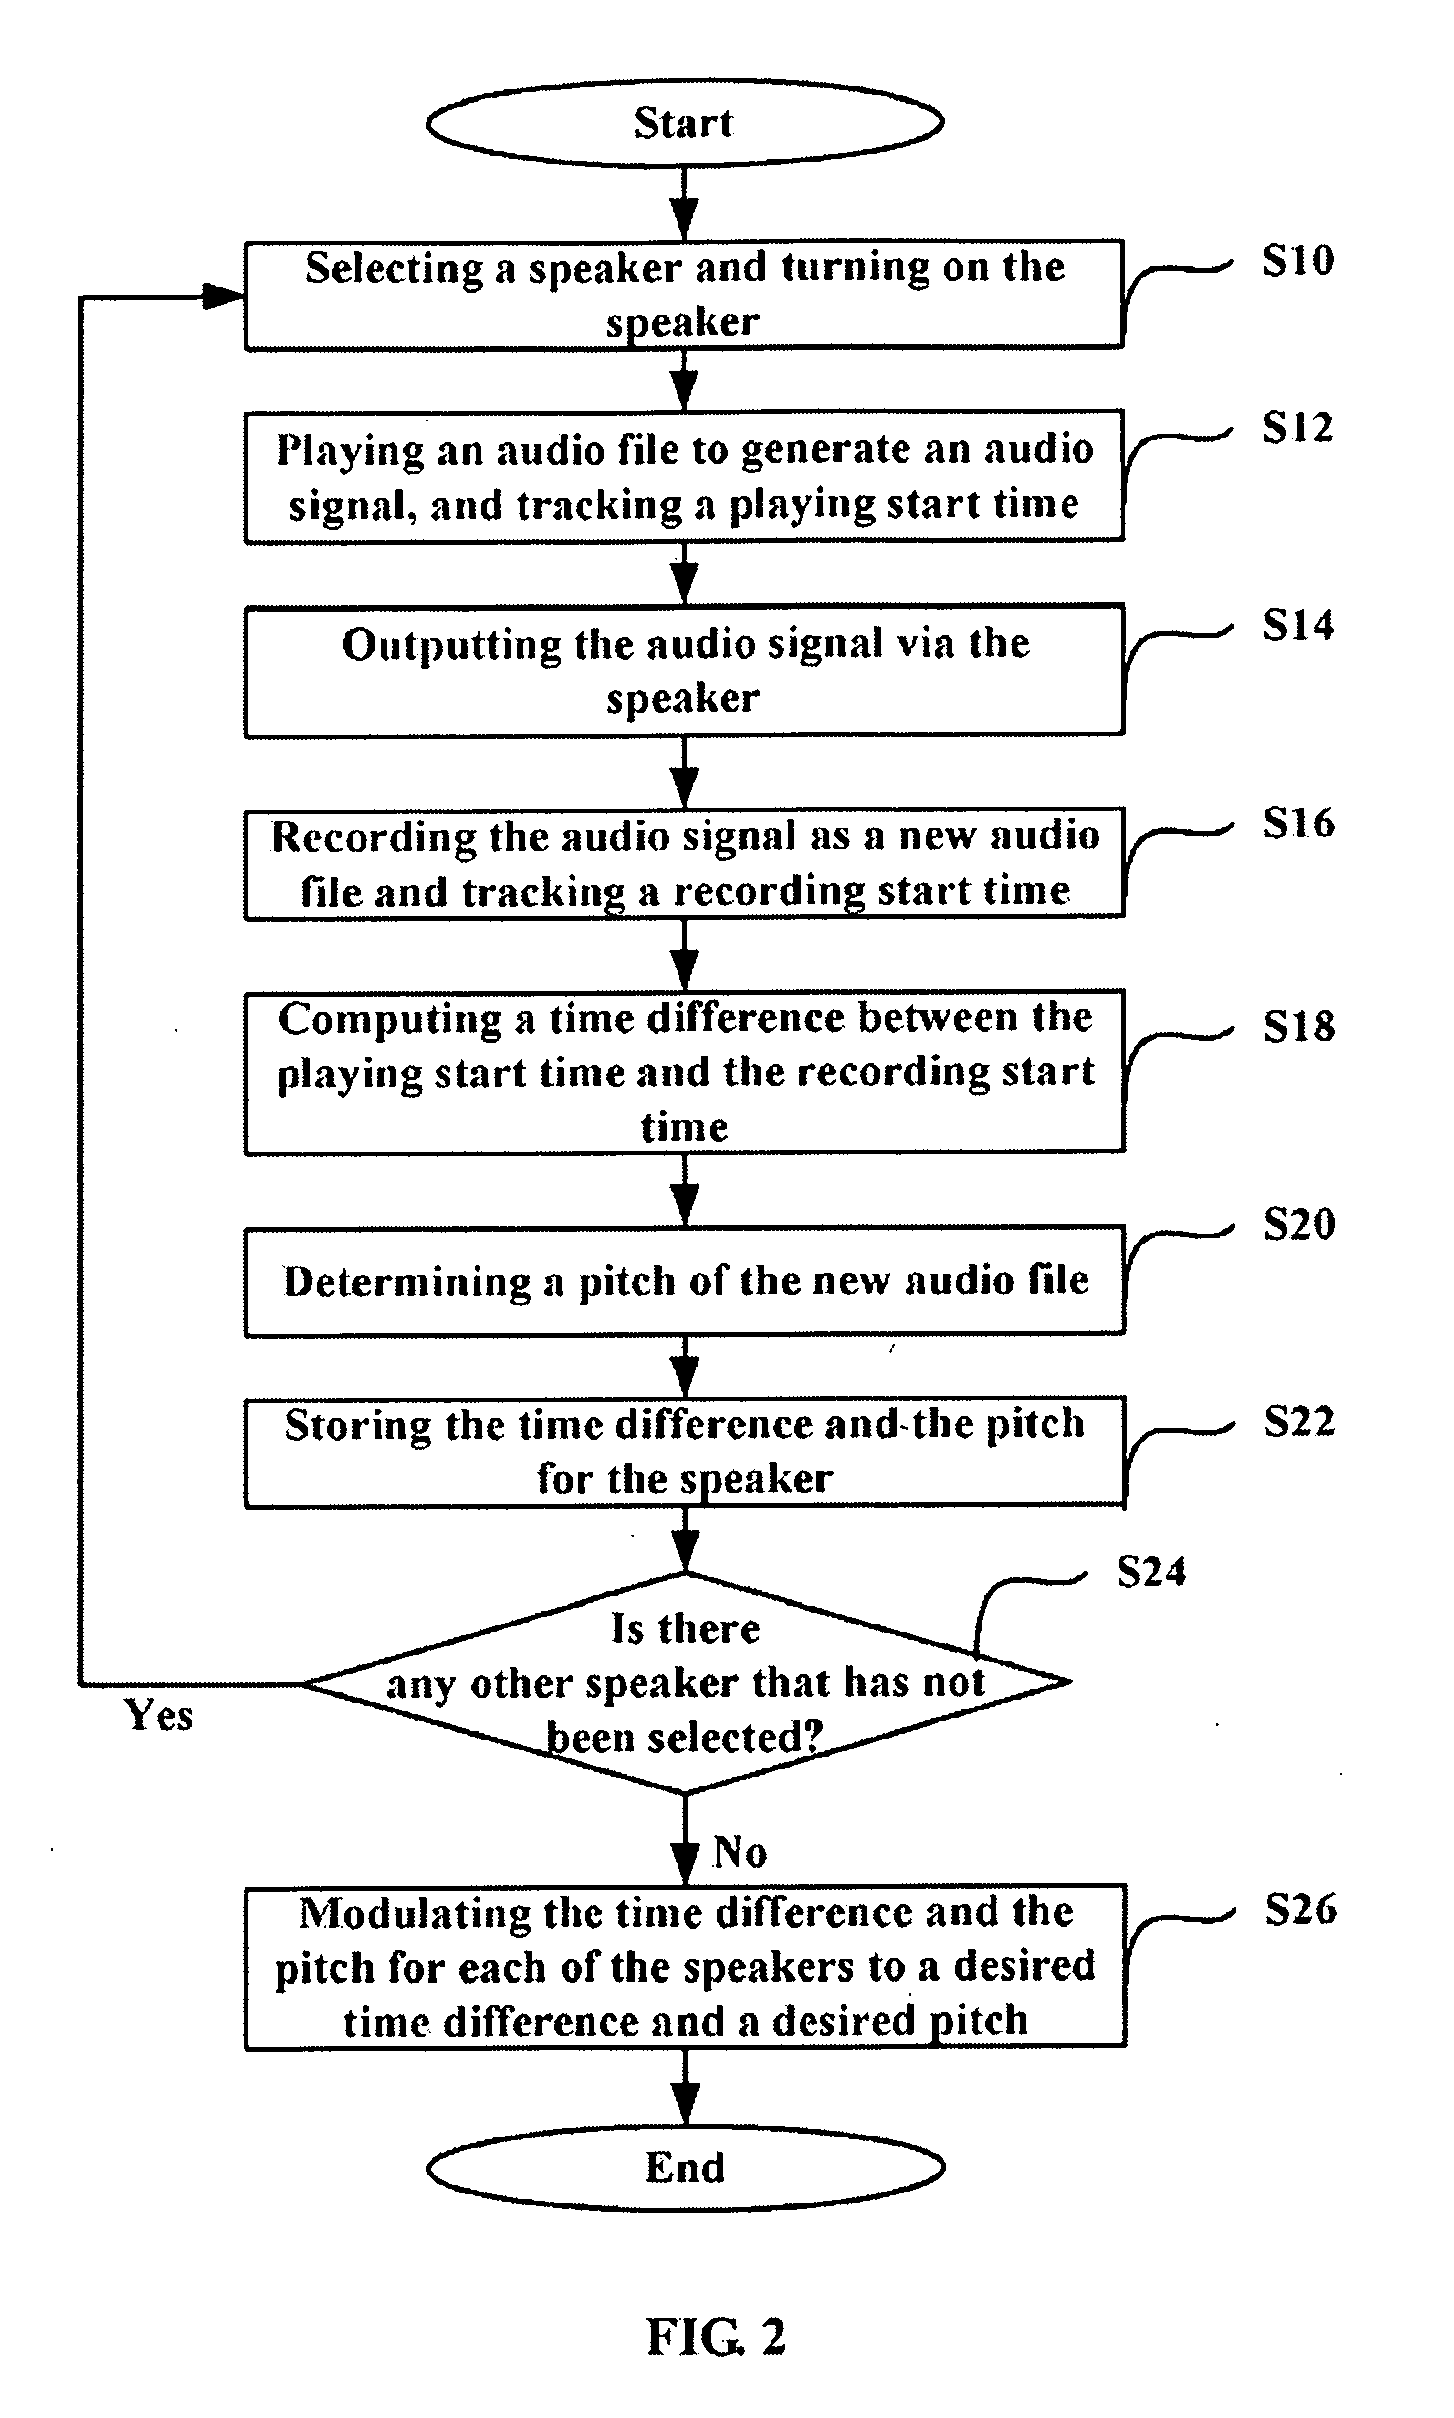 System and method for modulating audio effects of speakers in a sound system